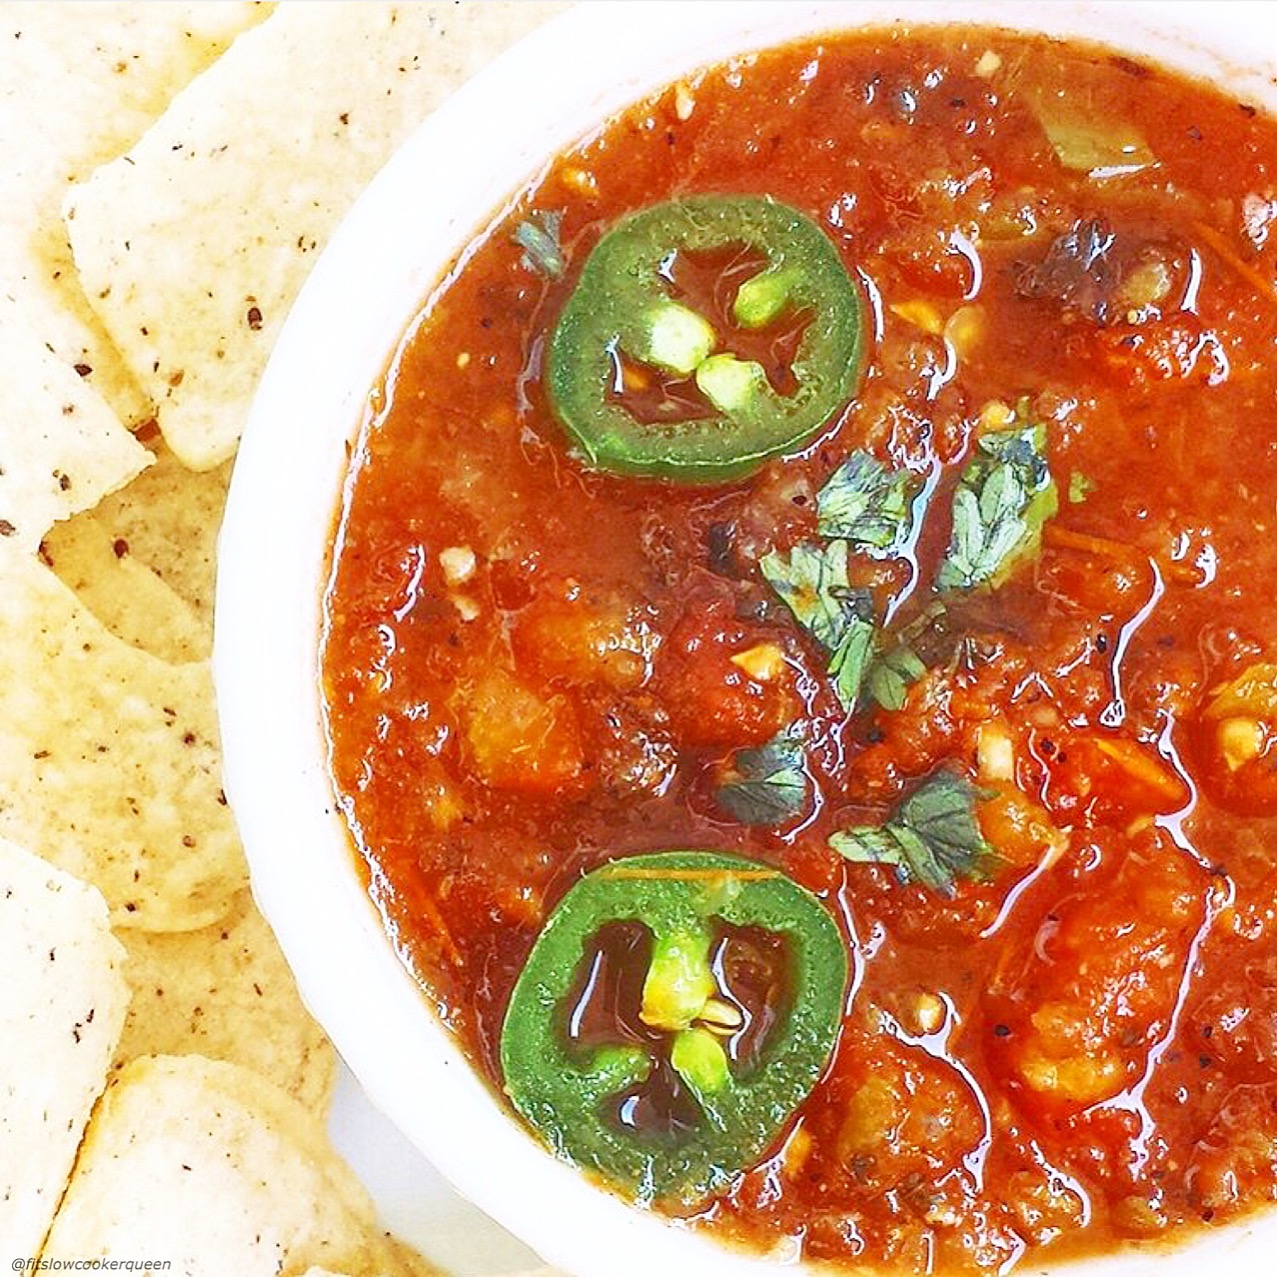 This salsa recipe is so easy & good you might never buy store-bought again. Using fresh ingredients, you'll have restaurant-style salsa made right in your slow cooker or Instant Pot.